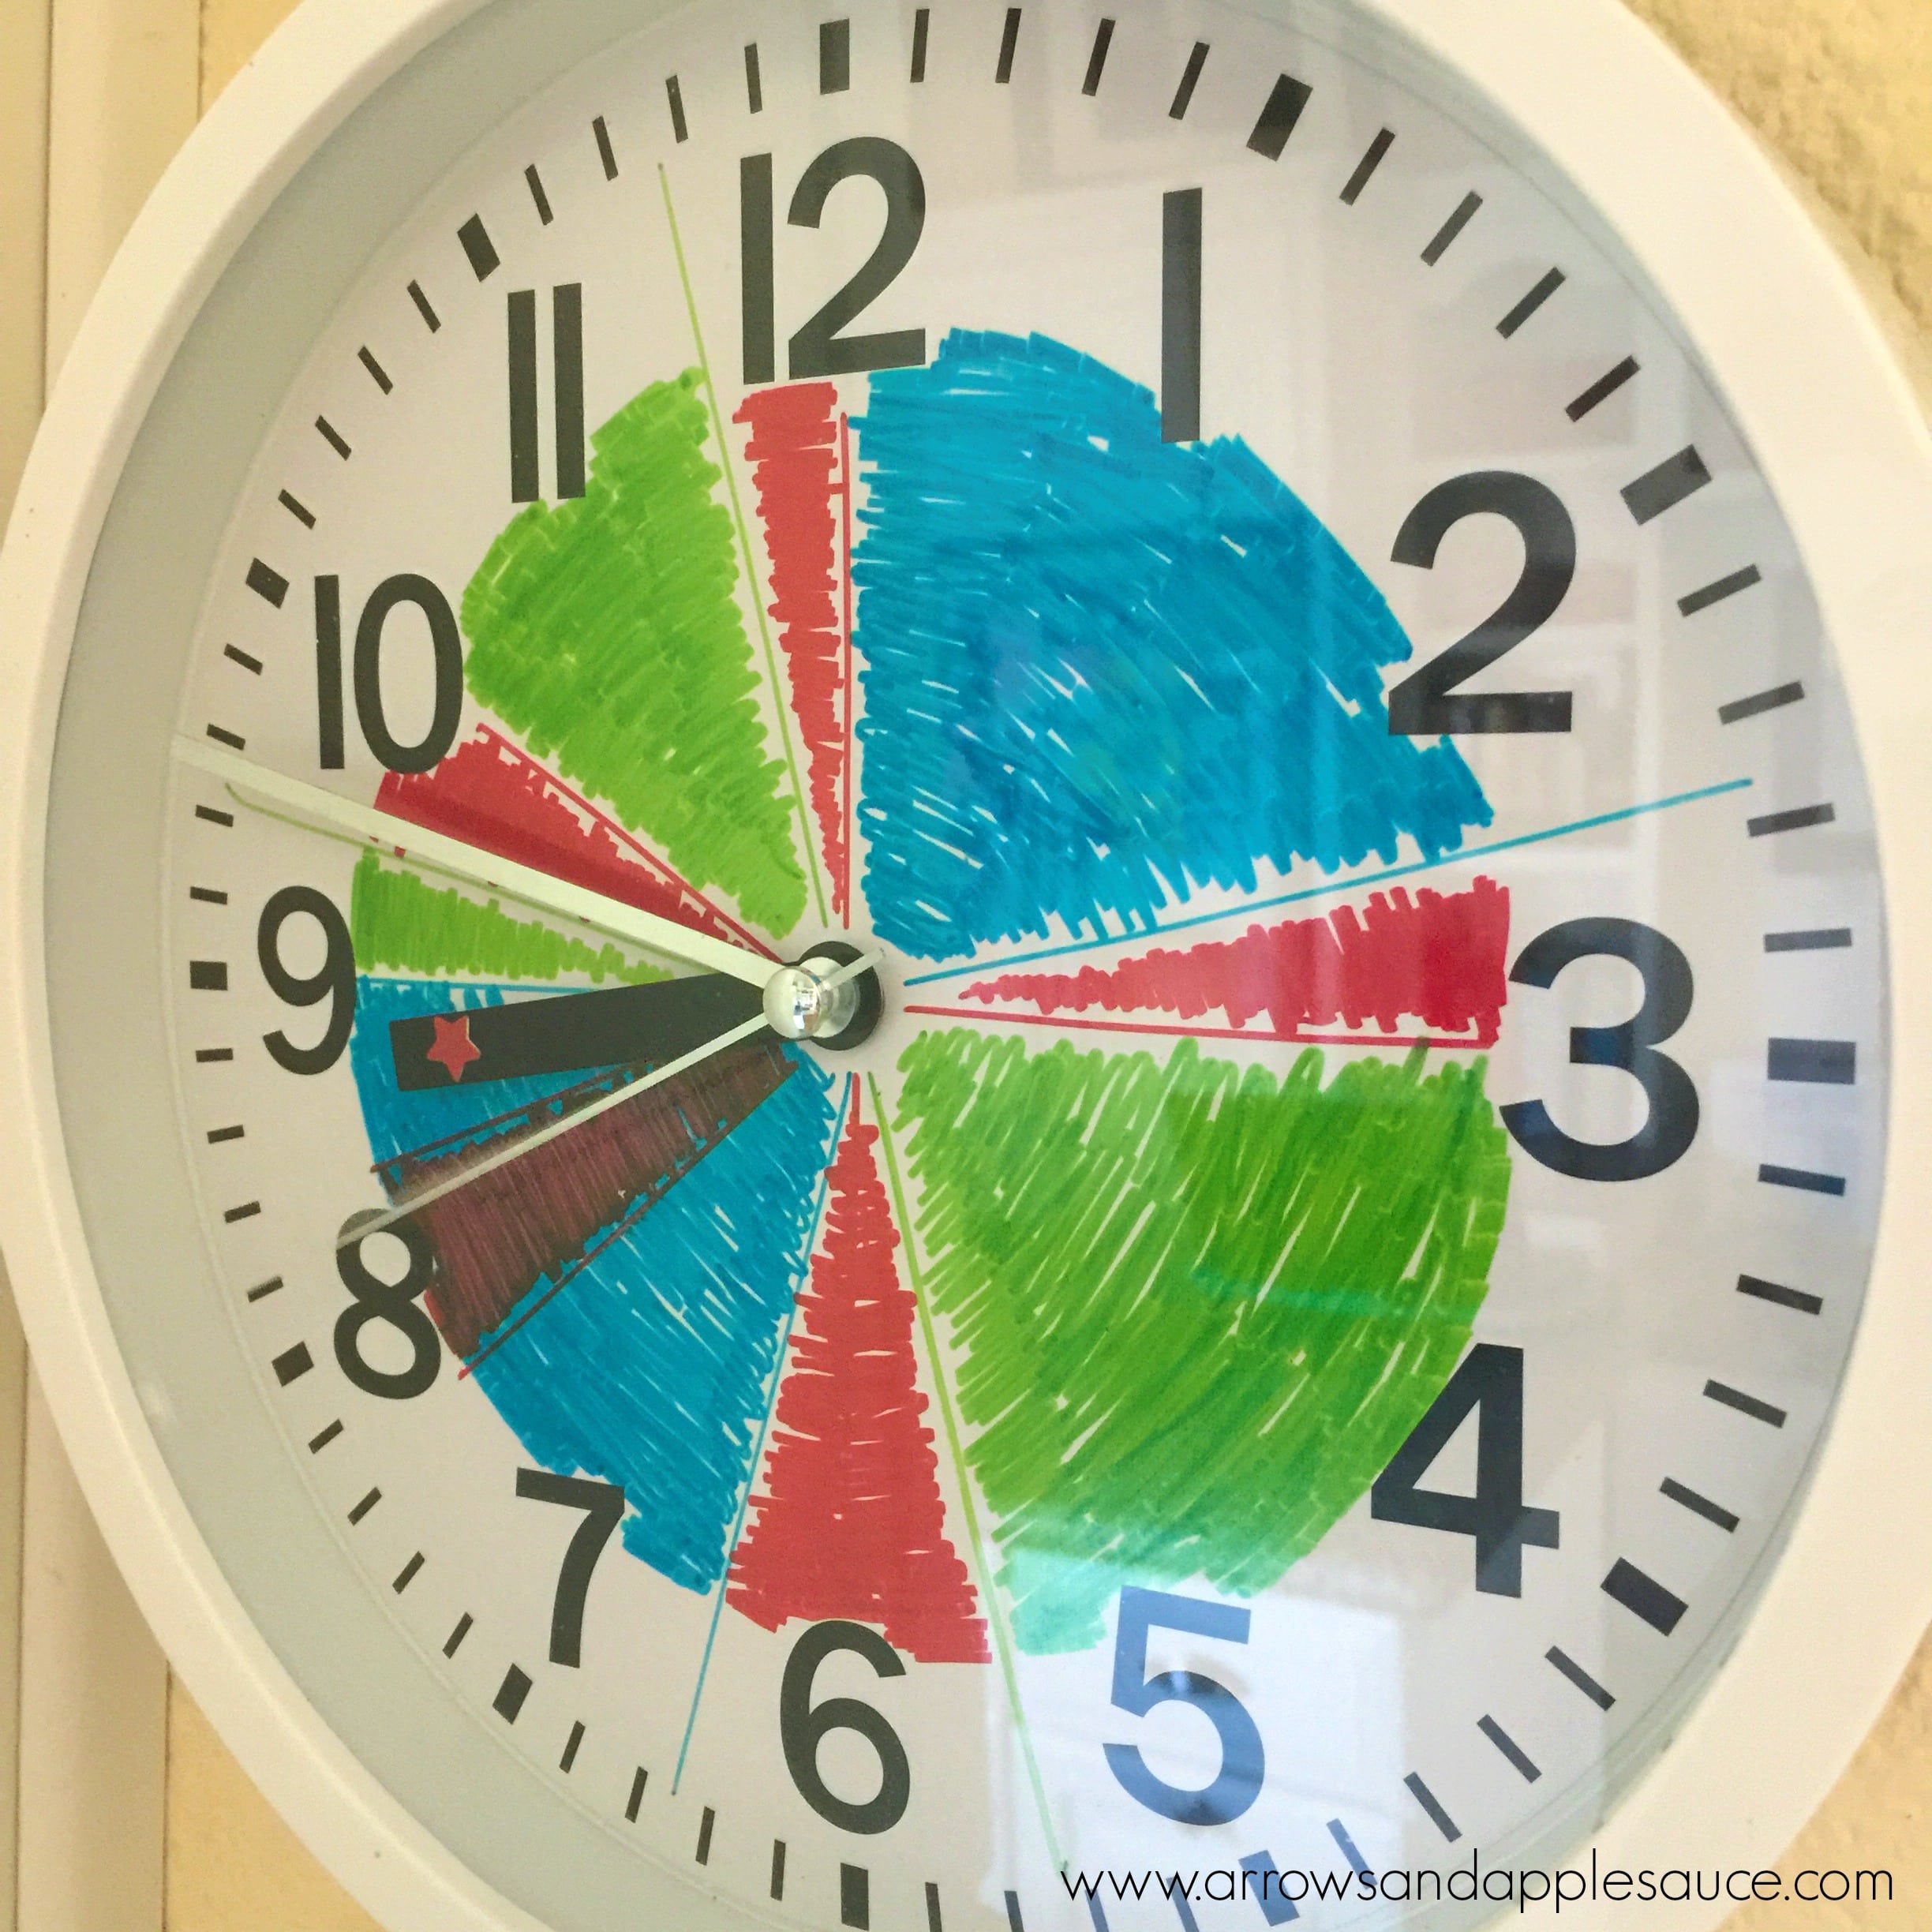 Our daily routine with three kids under five years old is full and busy! Here is what an average day looks like for us. We always find time for play with a little school and rest mixed in, lots of snacks, and happy memories. #dailyroutine #threekids #momlife #preschoolhomeschool #homeschoolroutine #learningathome #dailyschedule #kidsschedule